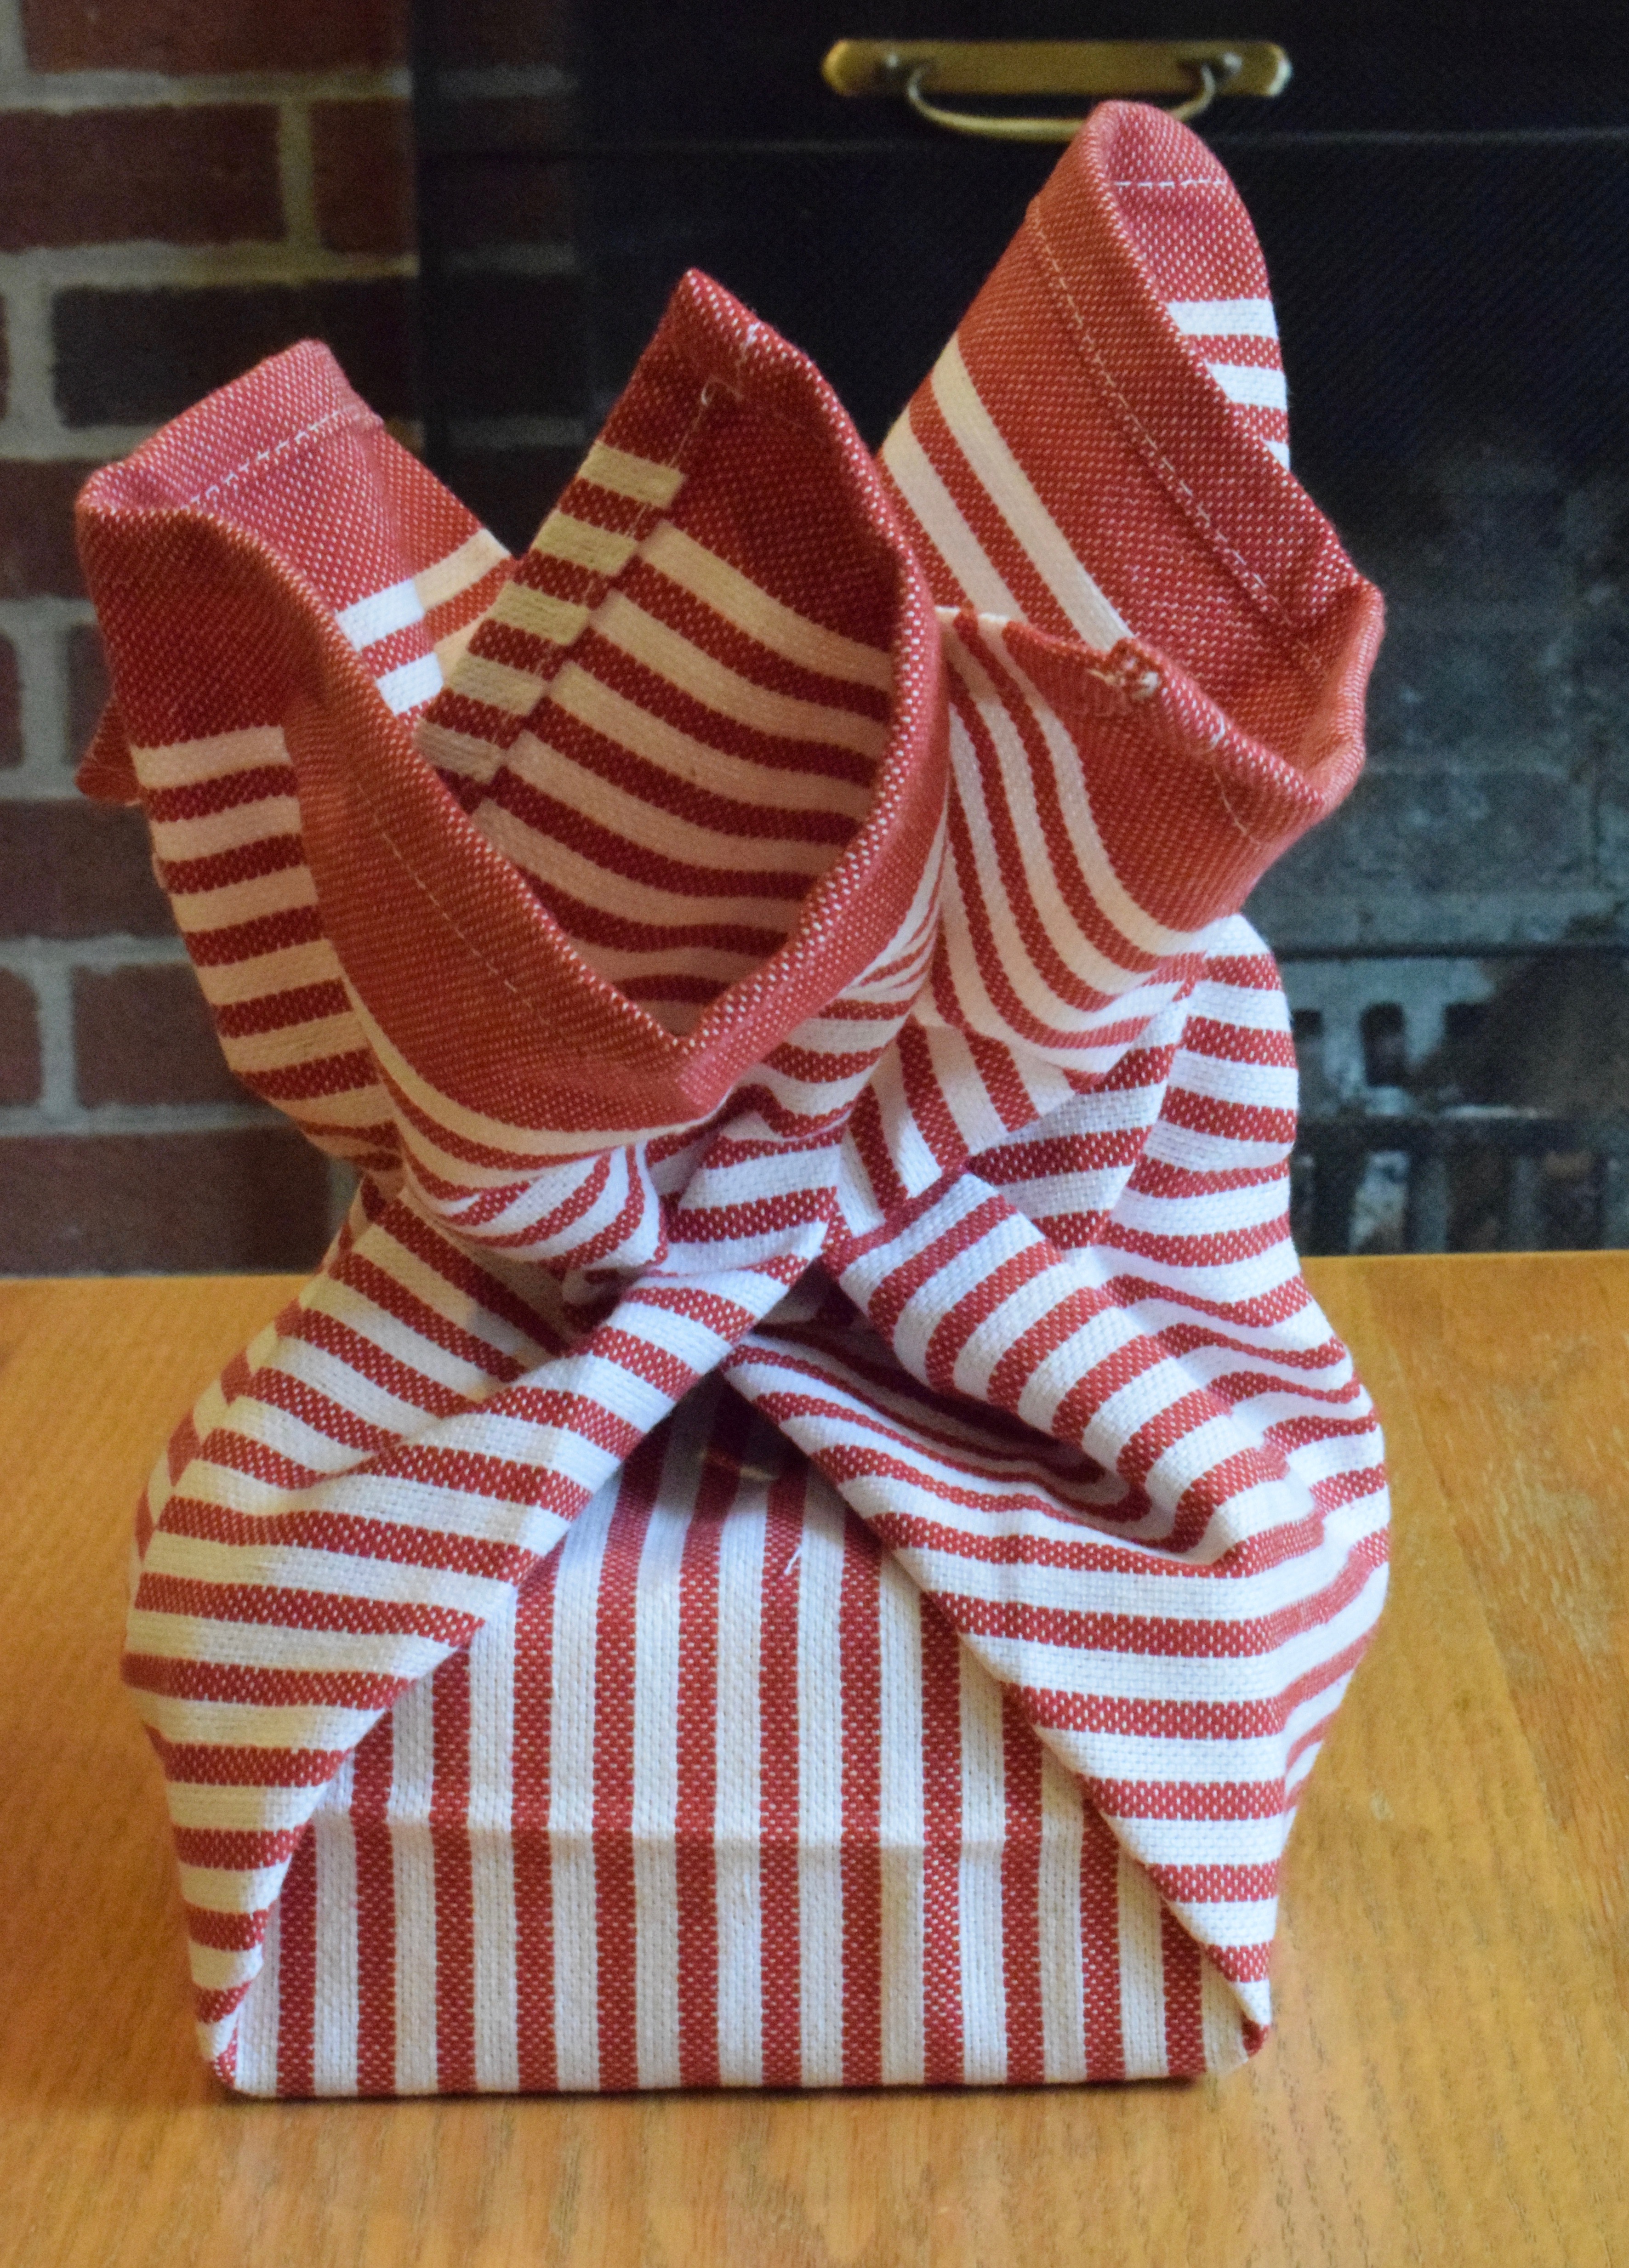 How to Wrap Gifts in Kitchen Towels Step Two Sides Pulled Up, Reusable Gift Wrapping